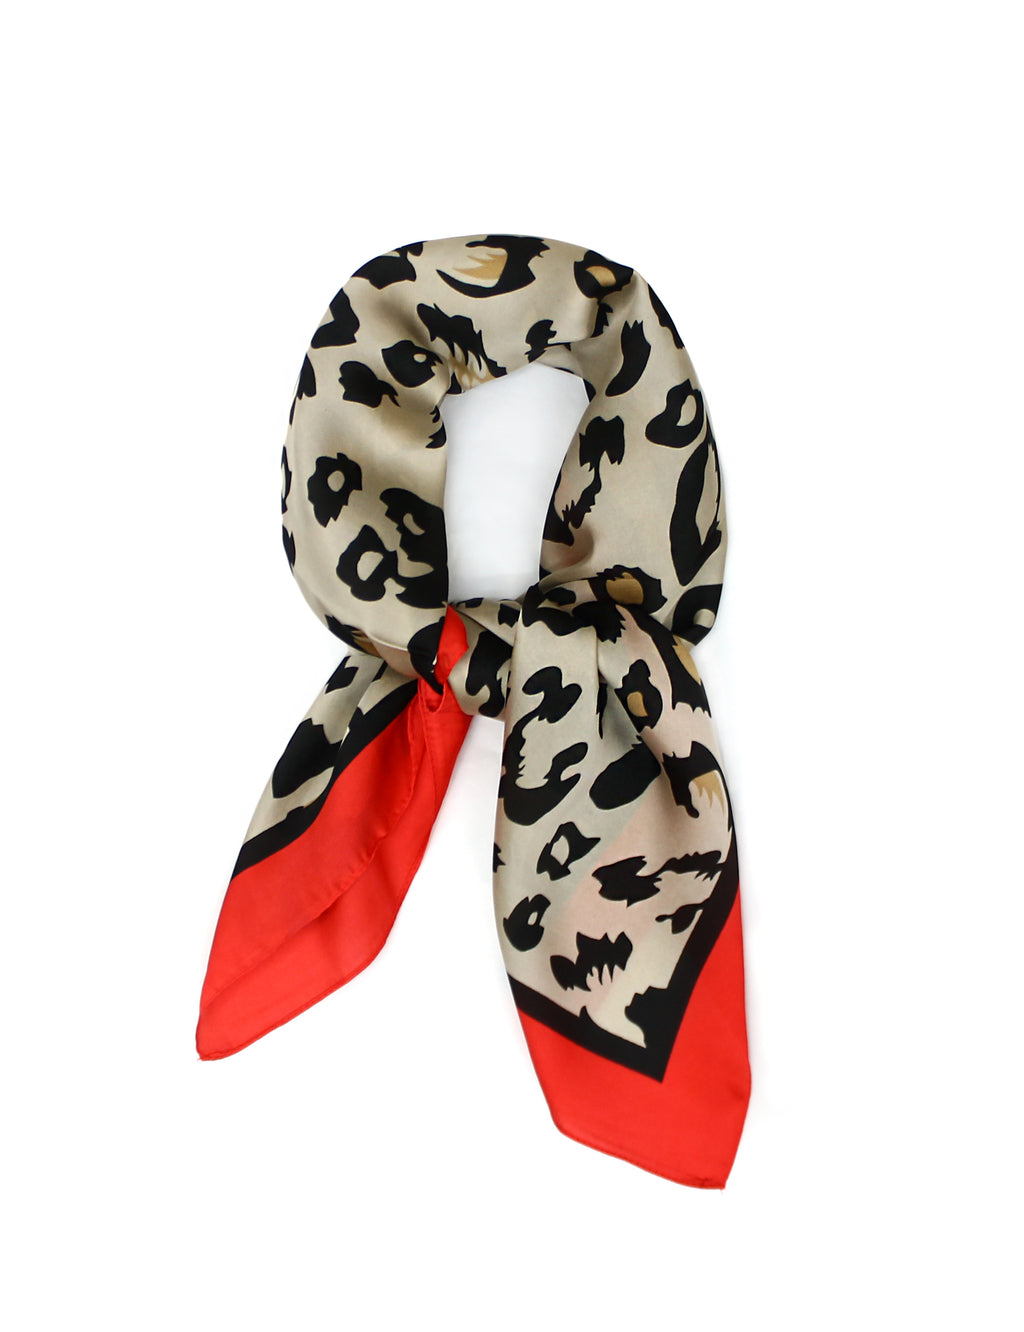 Leopard Print with Red Border Thin Silky Scarf for Summer and Spring